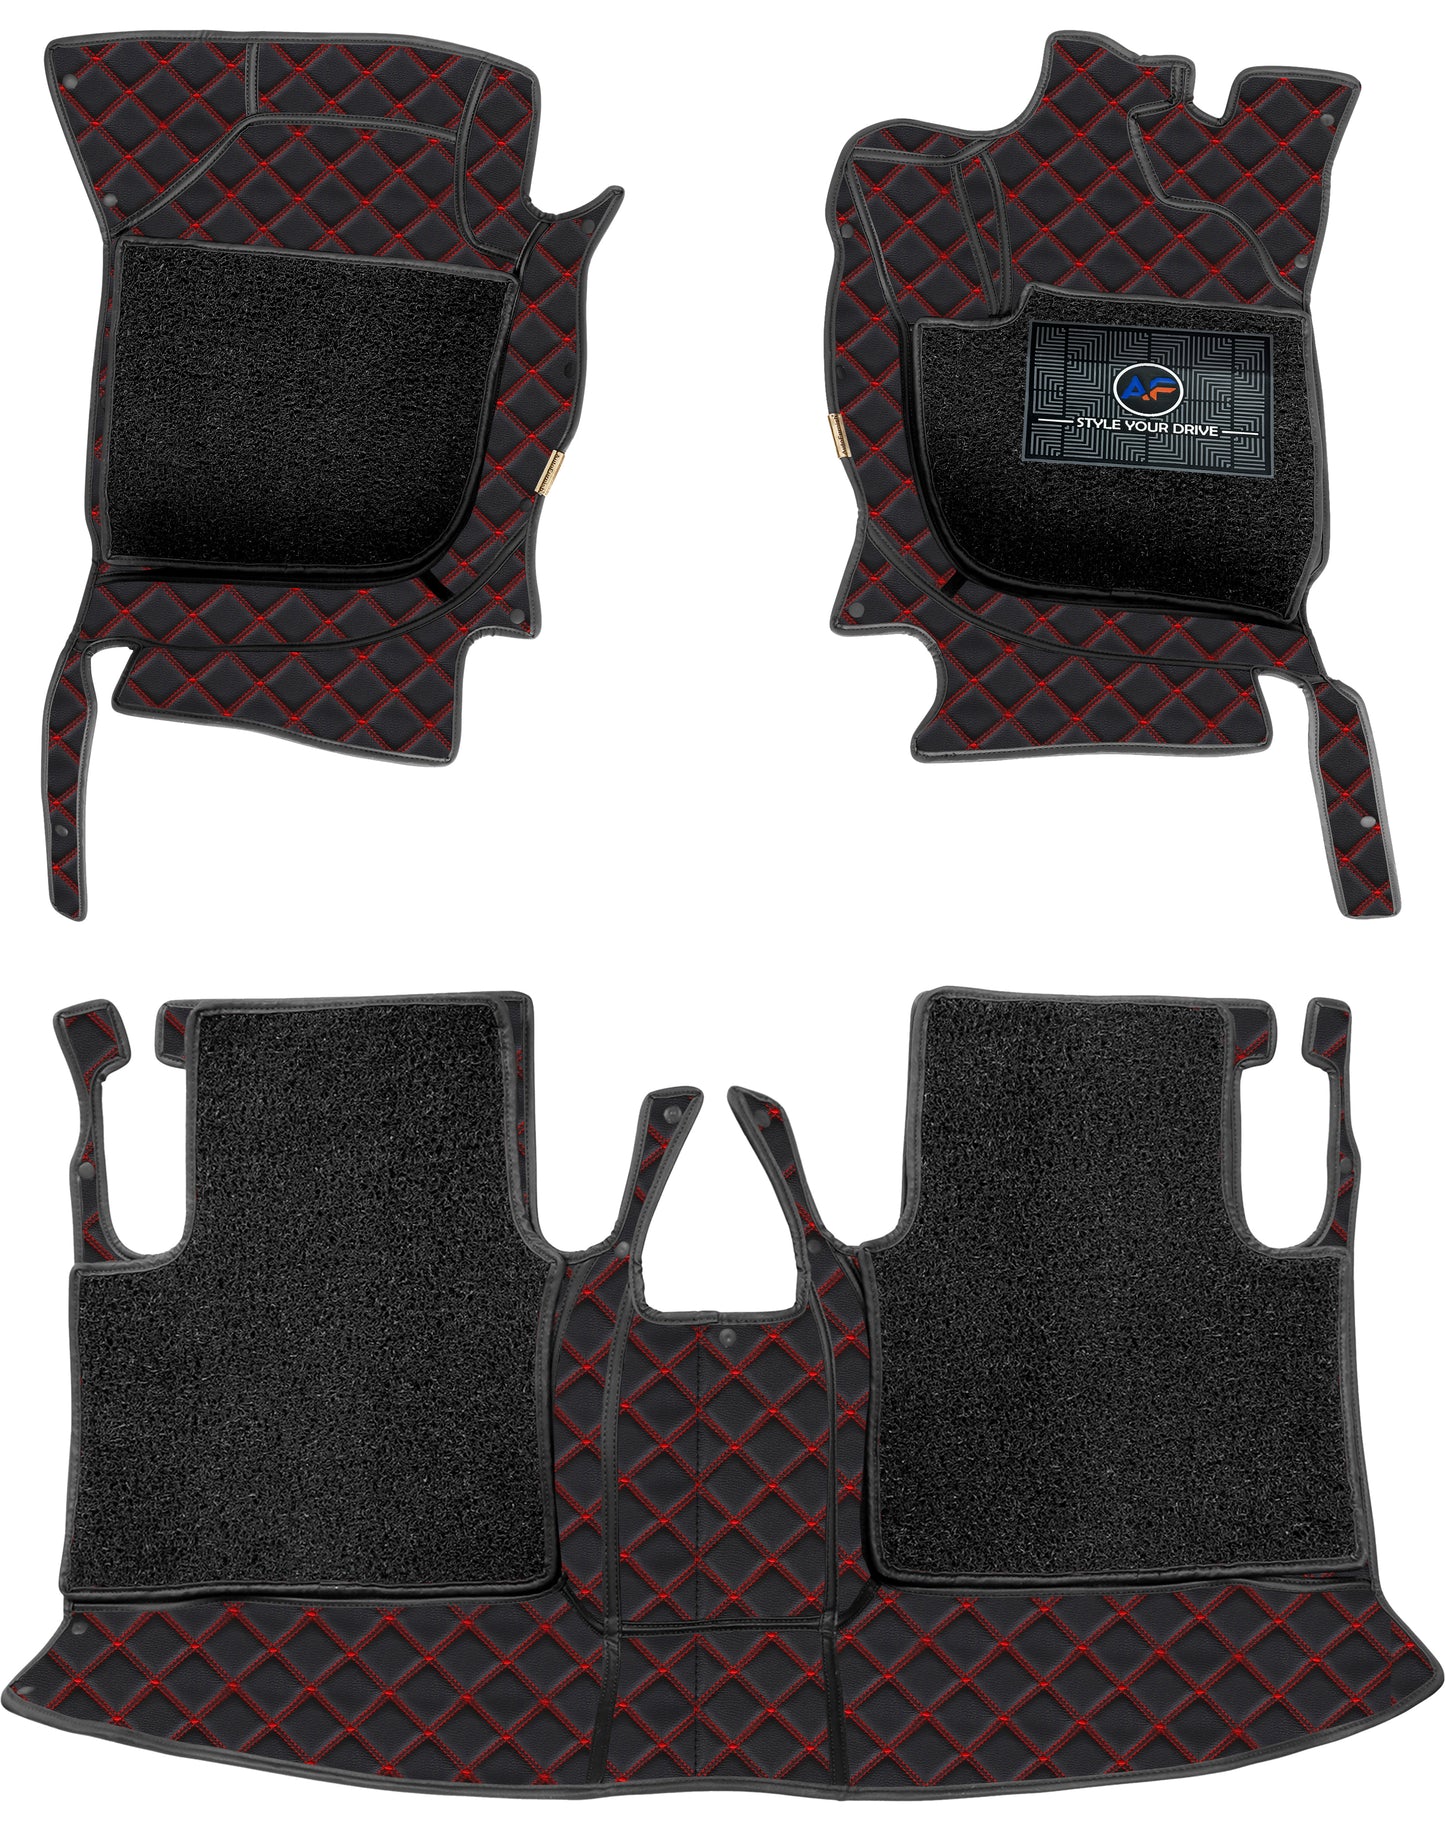 7d-Luxury-car-Footmats-for-Tata-Punch-2021-custom-designed-pu-leather-with-7-layer-depth-24mm-2-rows